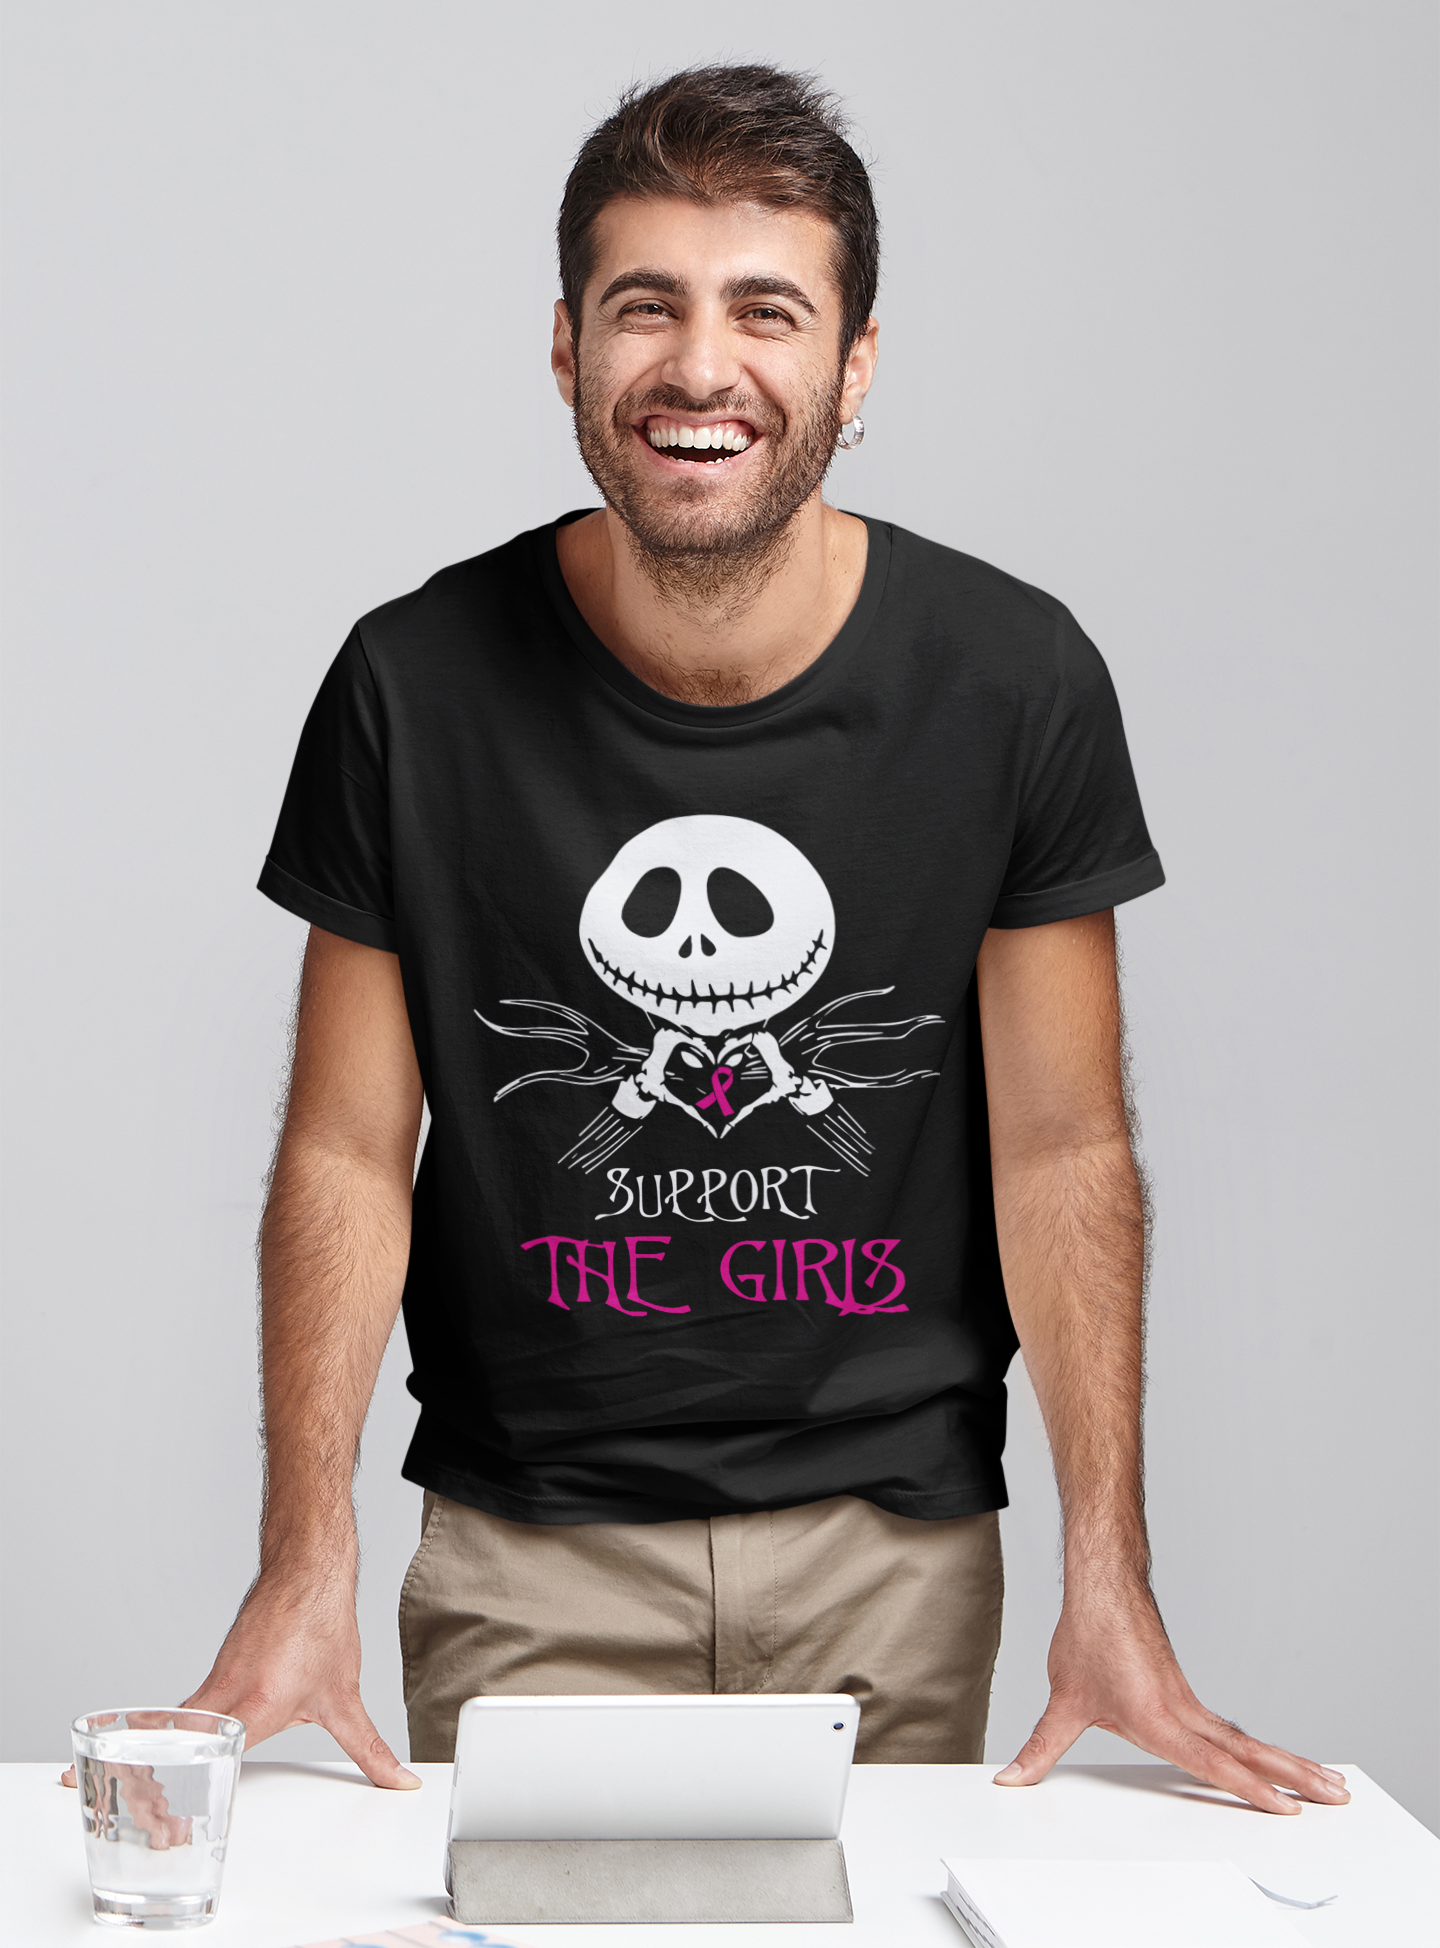 Nightmare Before Christmas T Shirt, Support The Girls Tshirt, Jack Skellington T Shirt, Breast Cancer Awareness Gifts